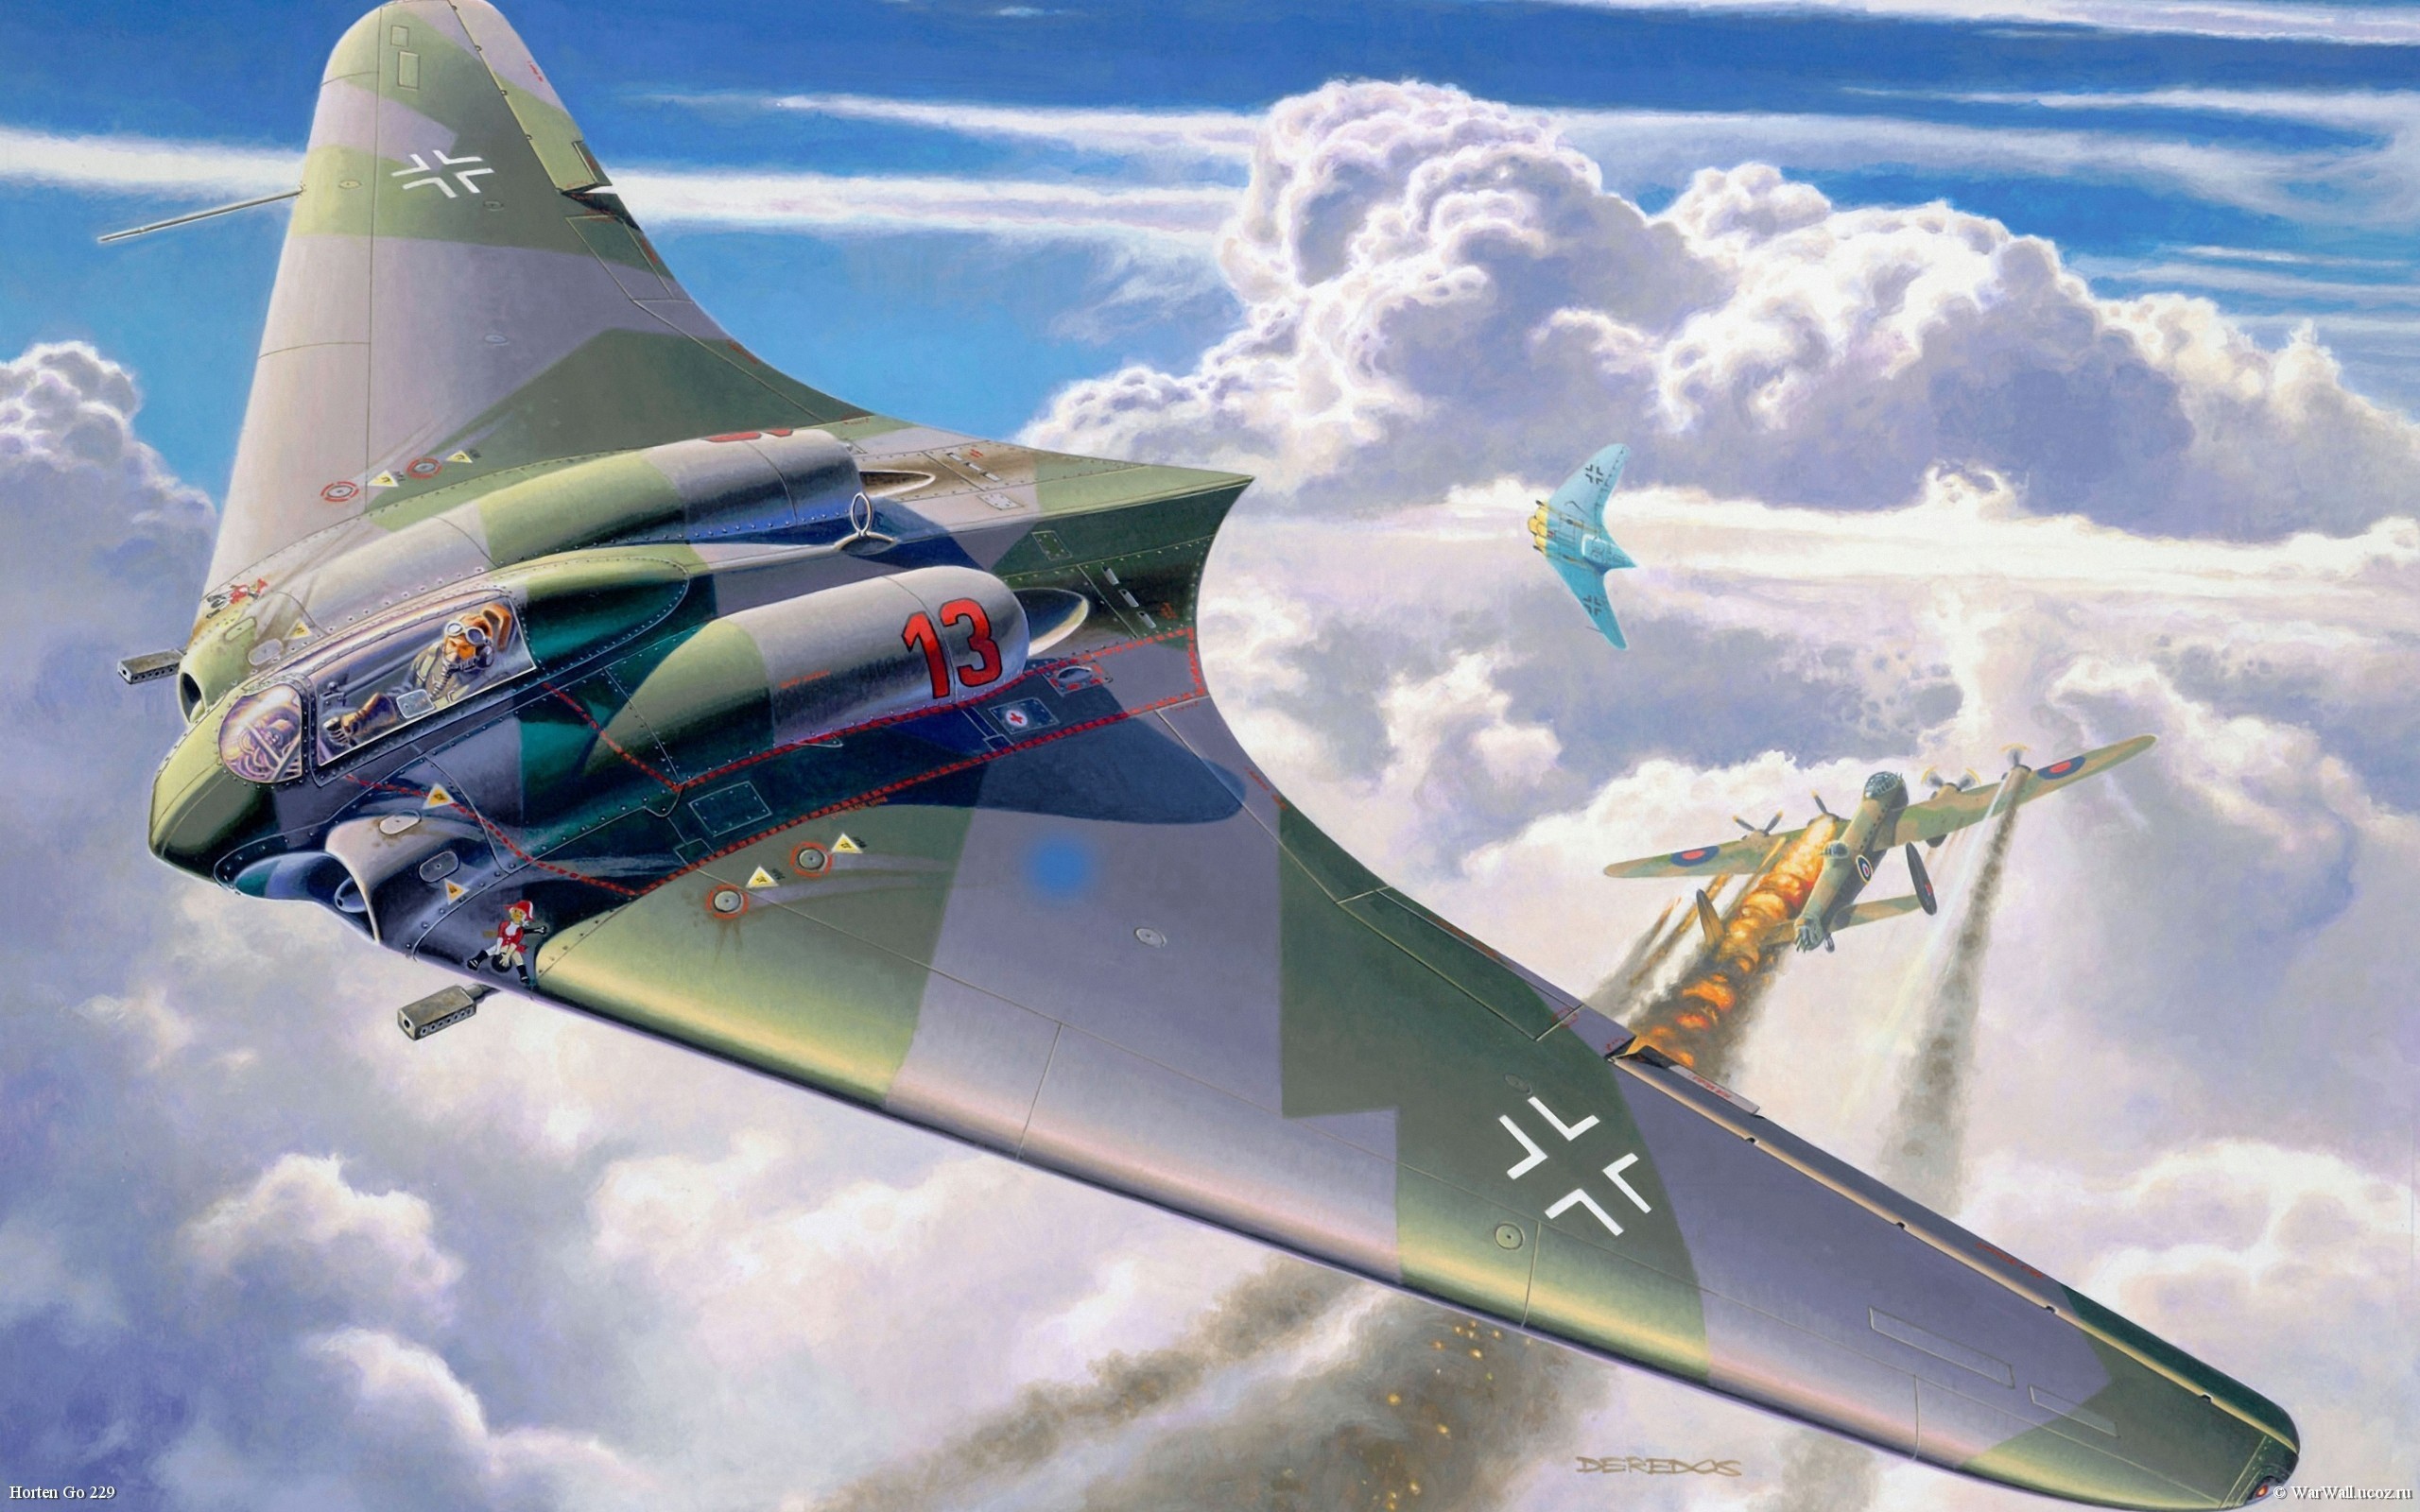 military, horten ho 229, air force, aircraft, airplane, fly, jet fighter, bombers download HD wallpaper